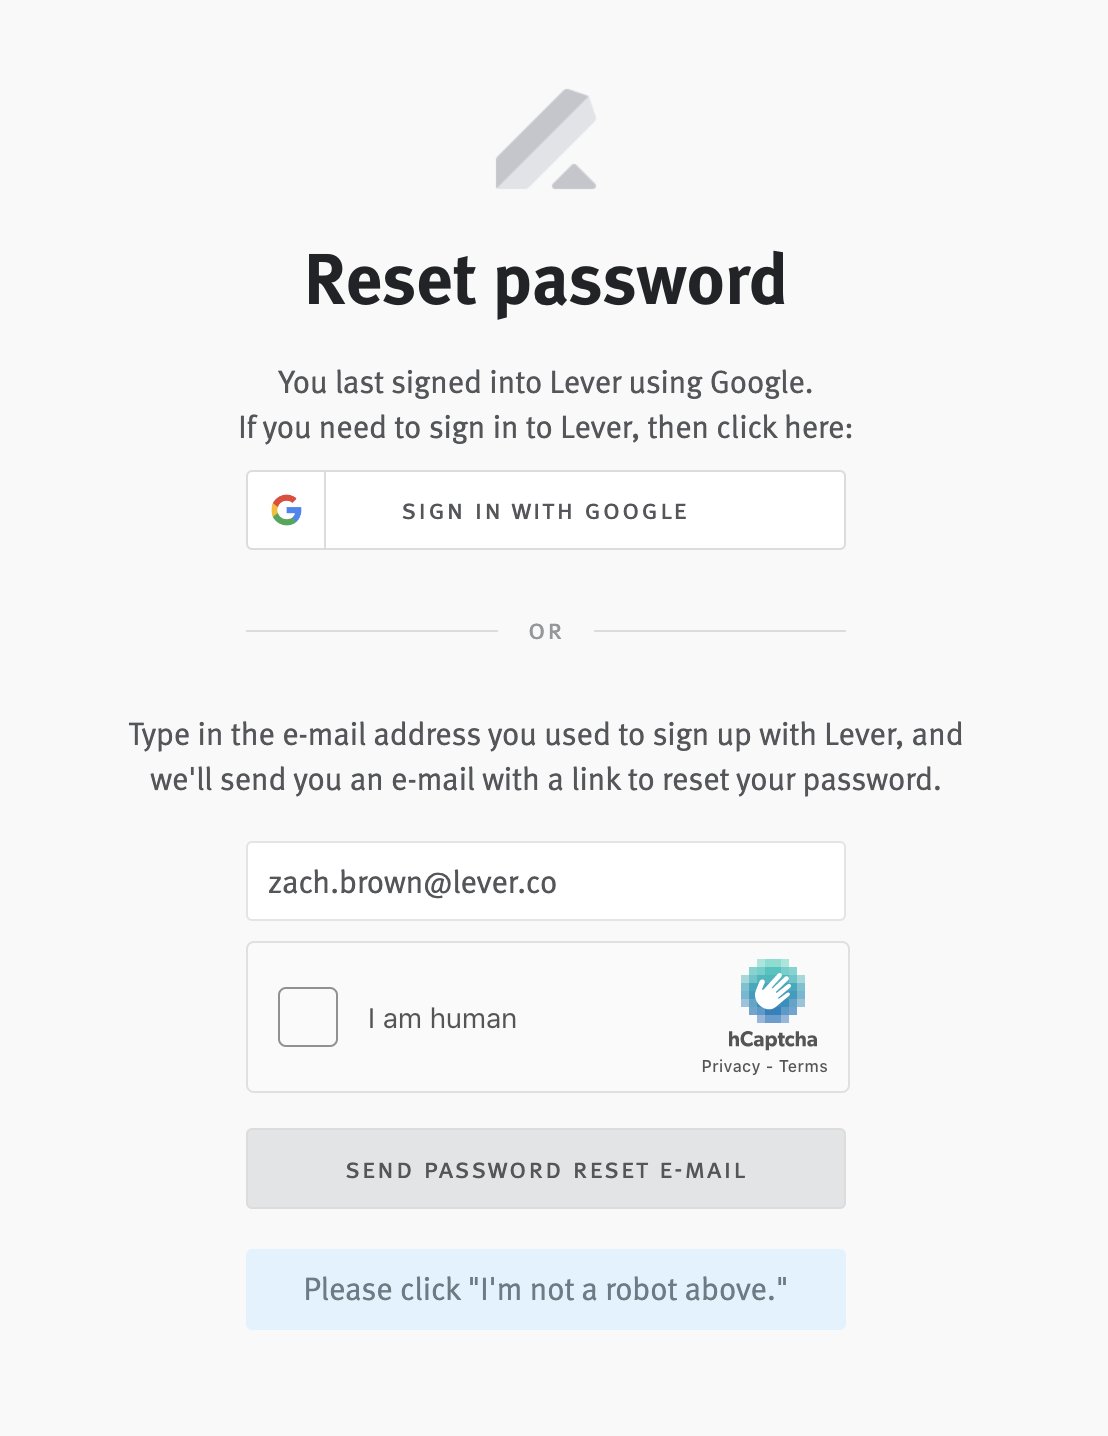 Lever password reset page